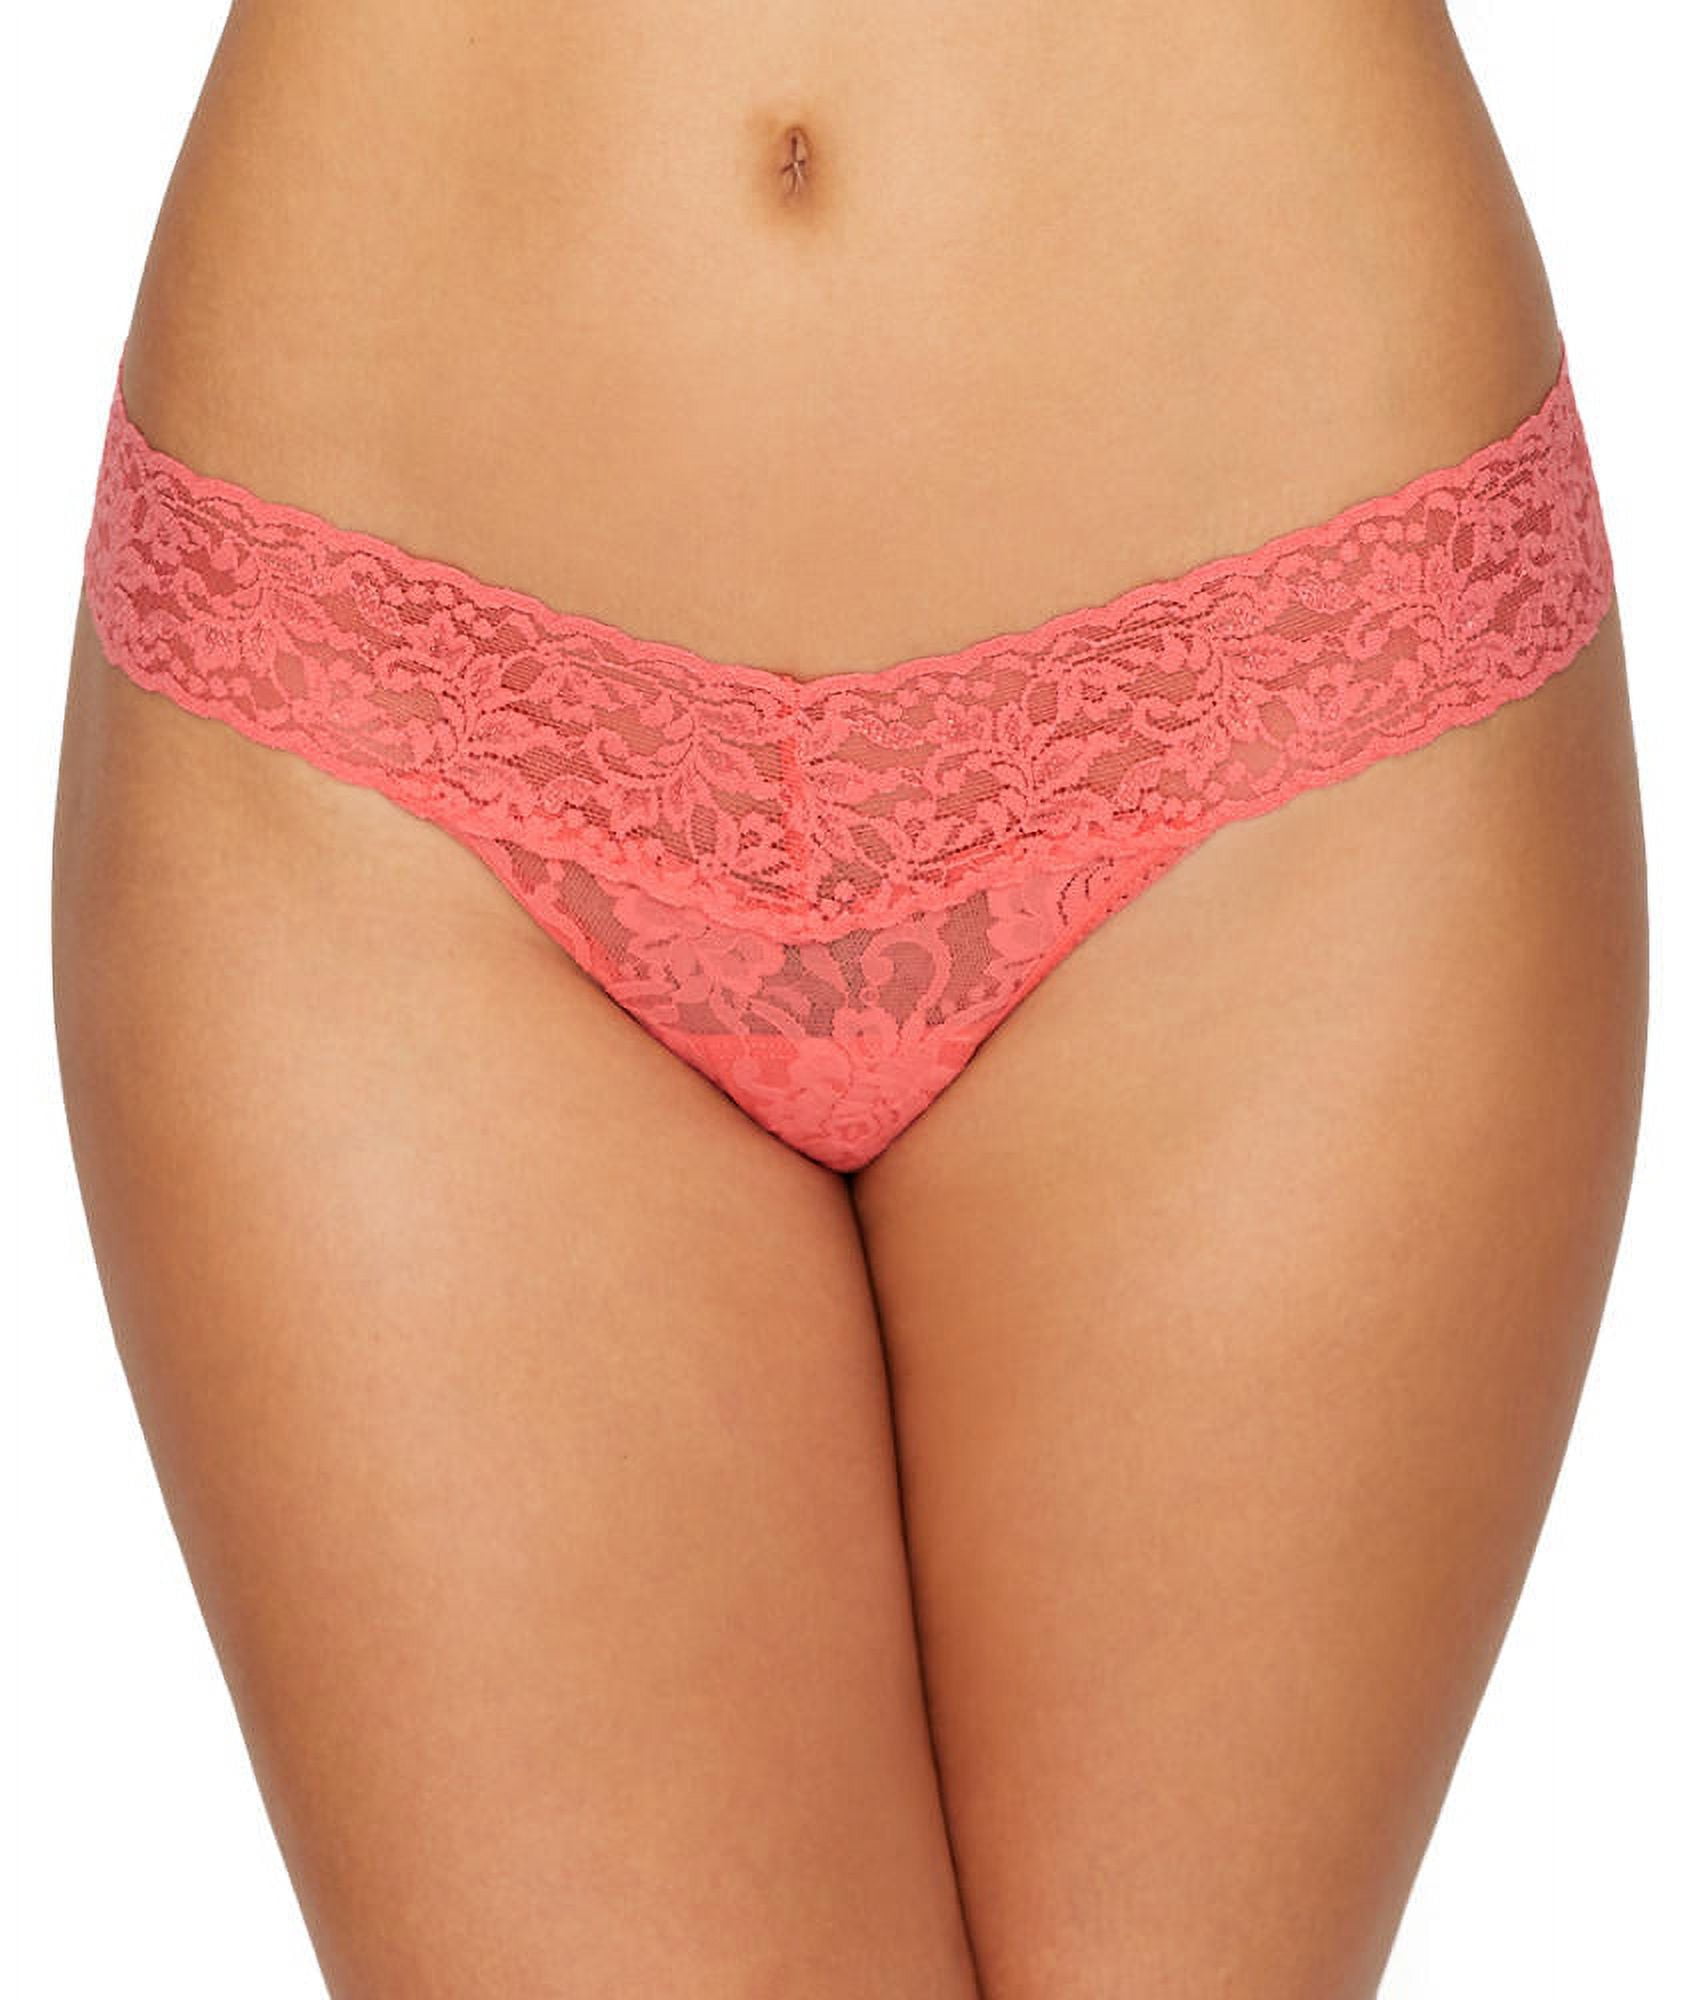 Hanky Panky Womens Signature Lace Low Rise Thong Style-4911